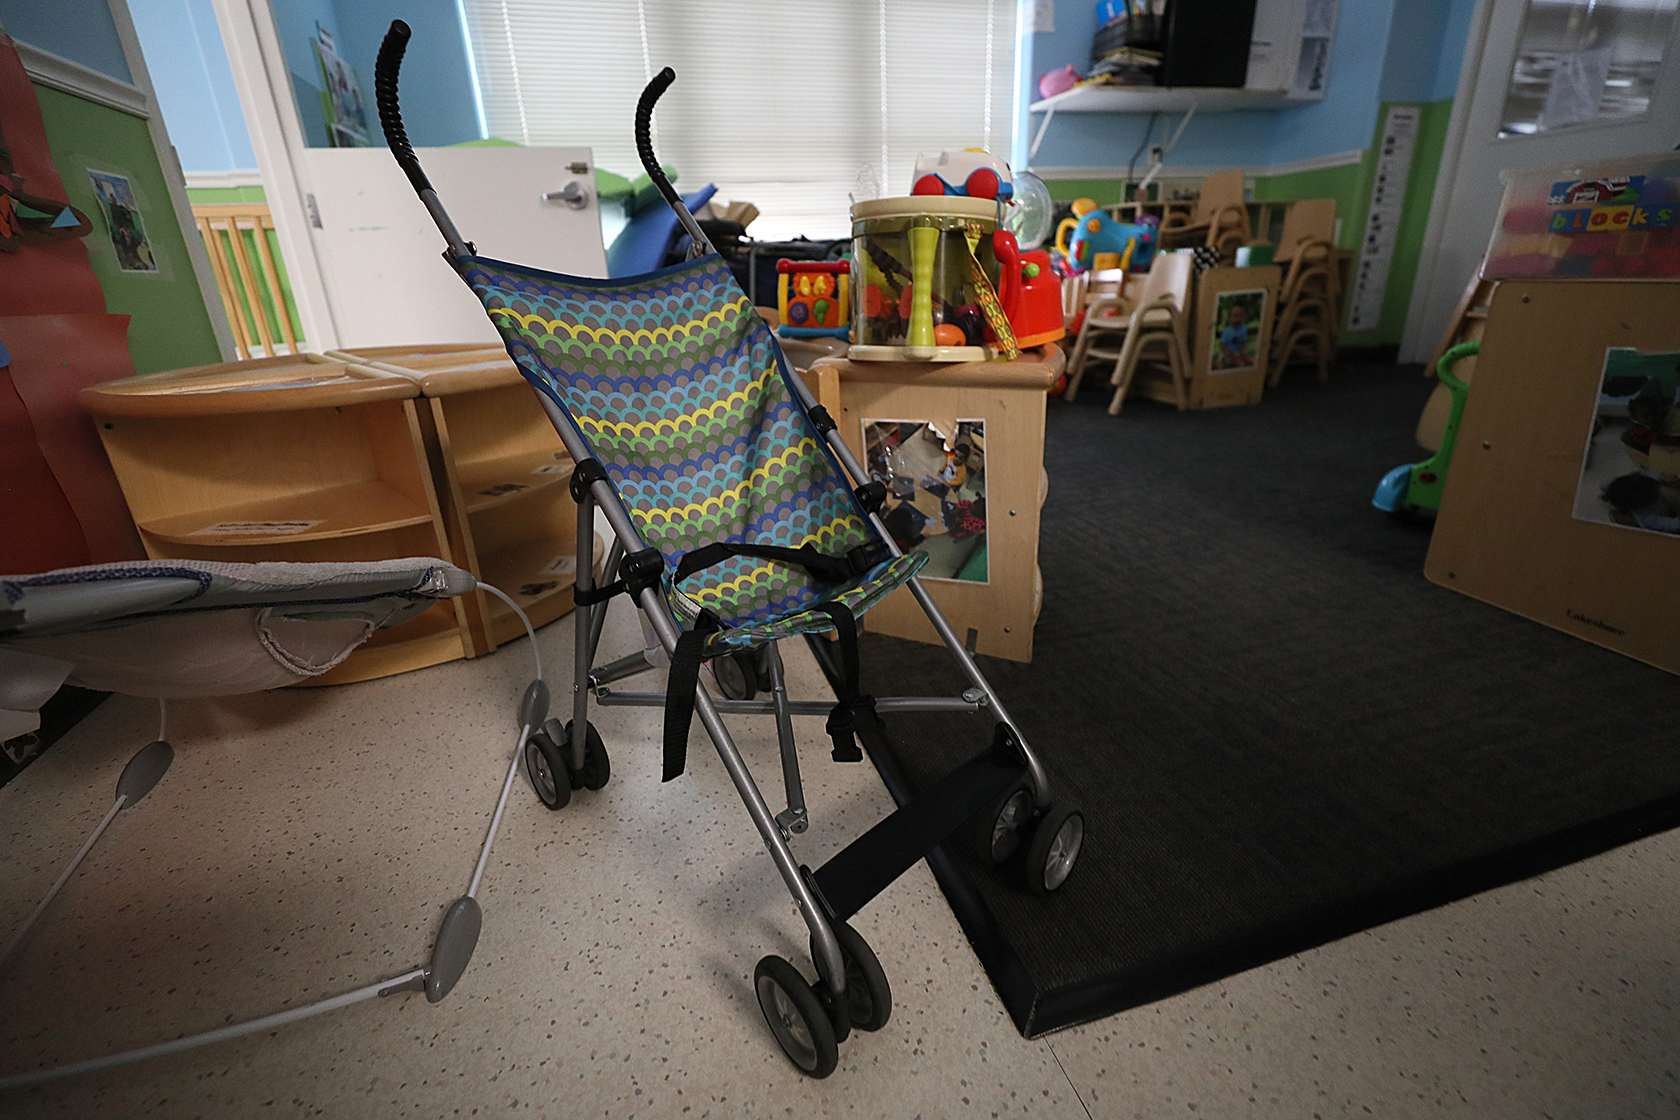 An empty child care room with a stroller in the foreground